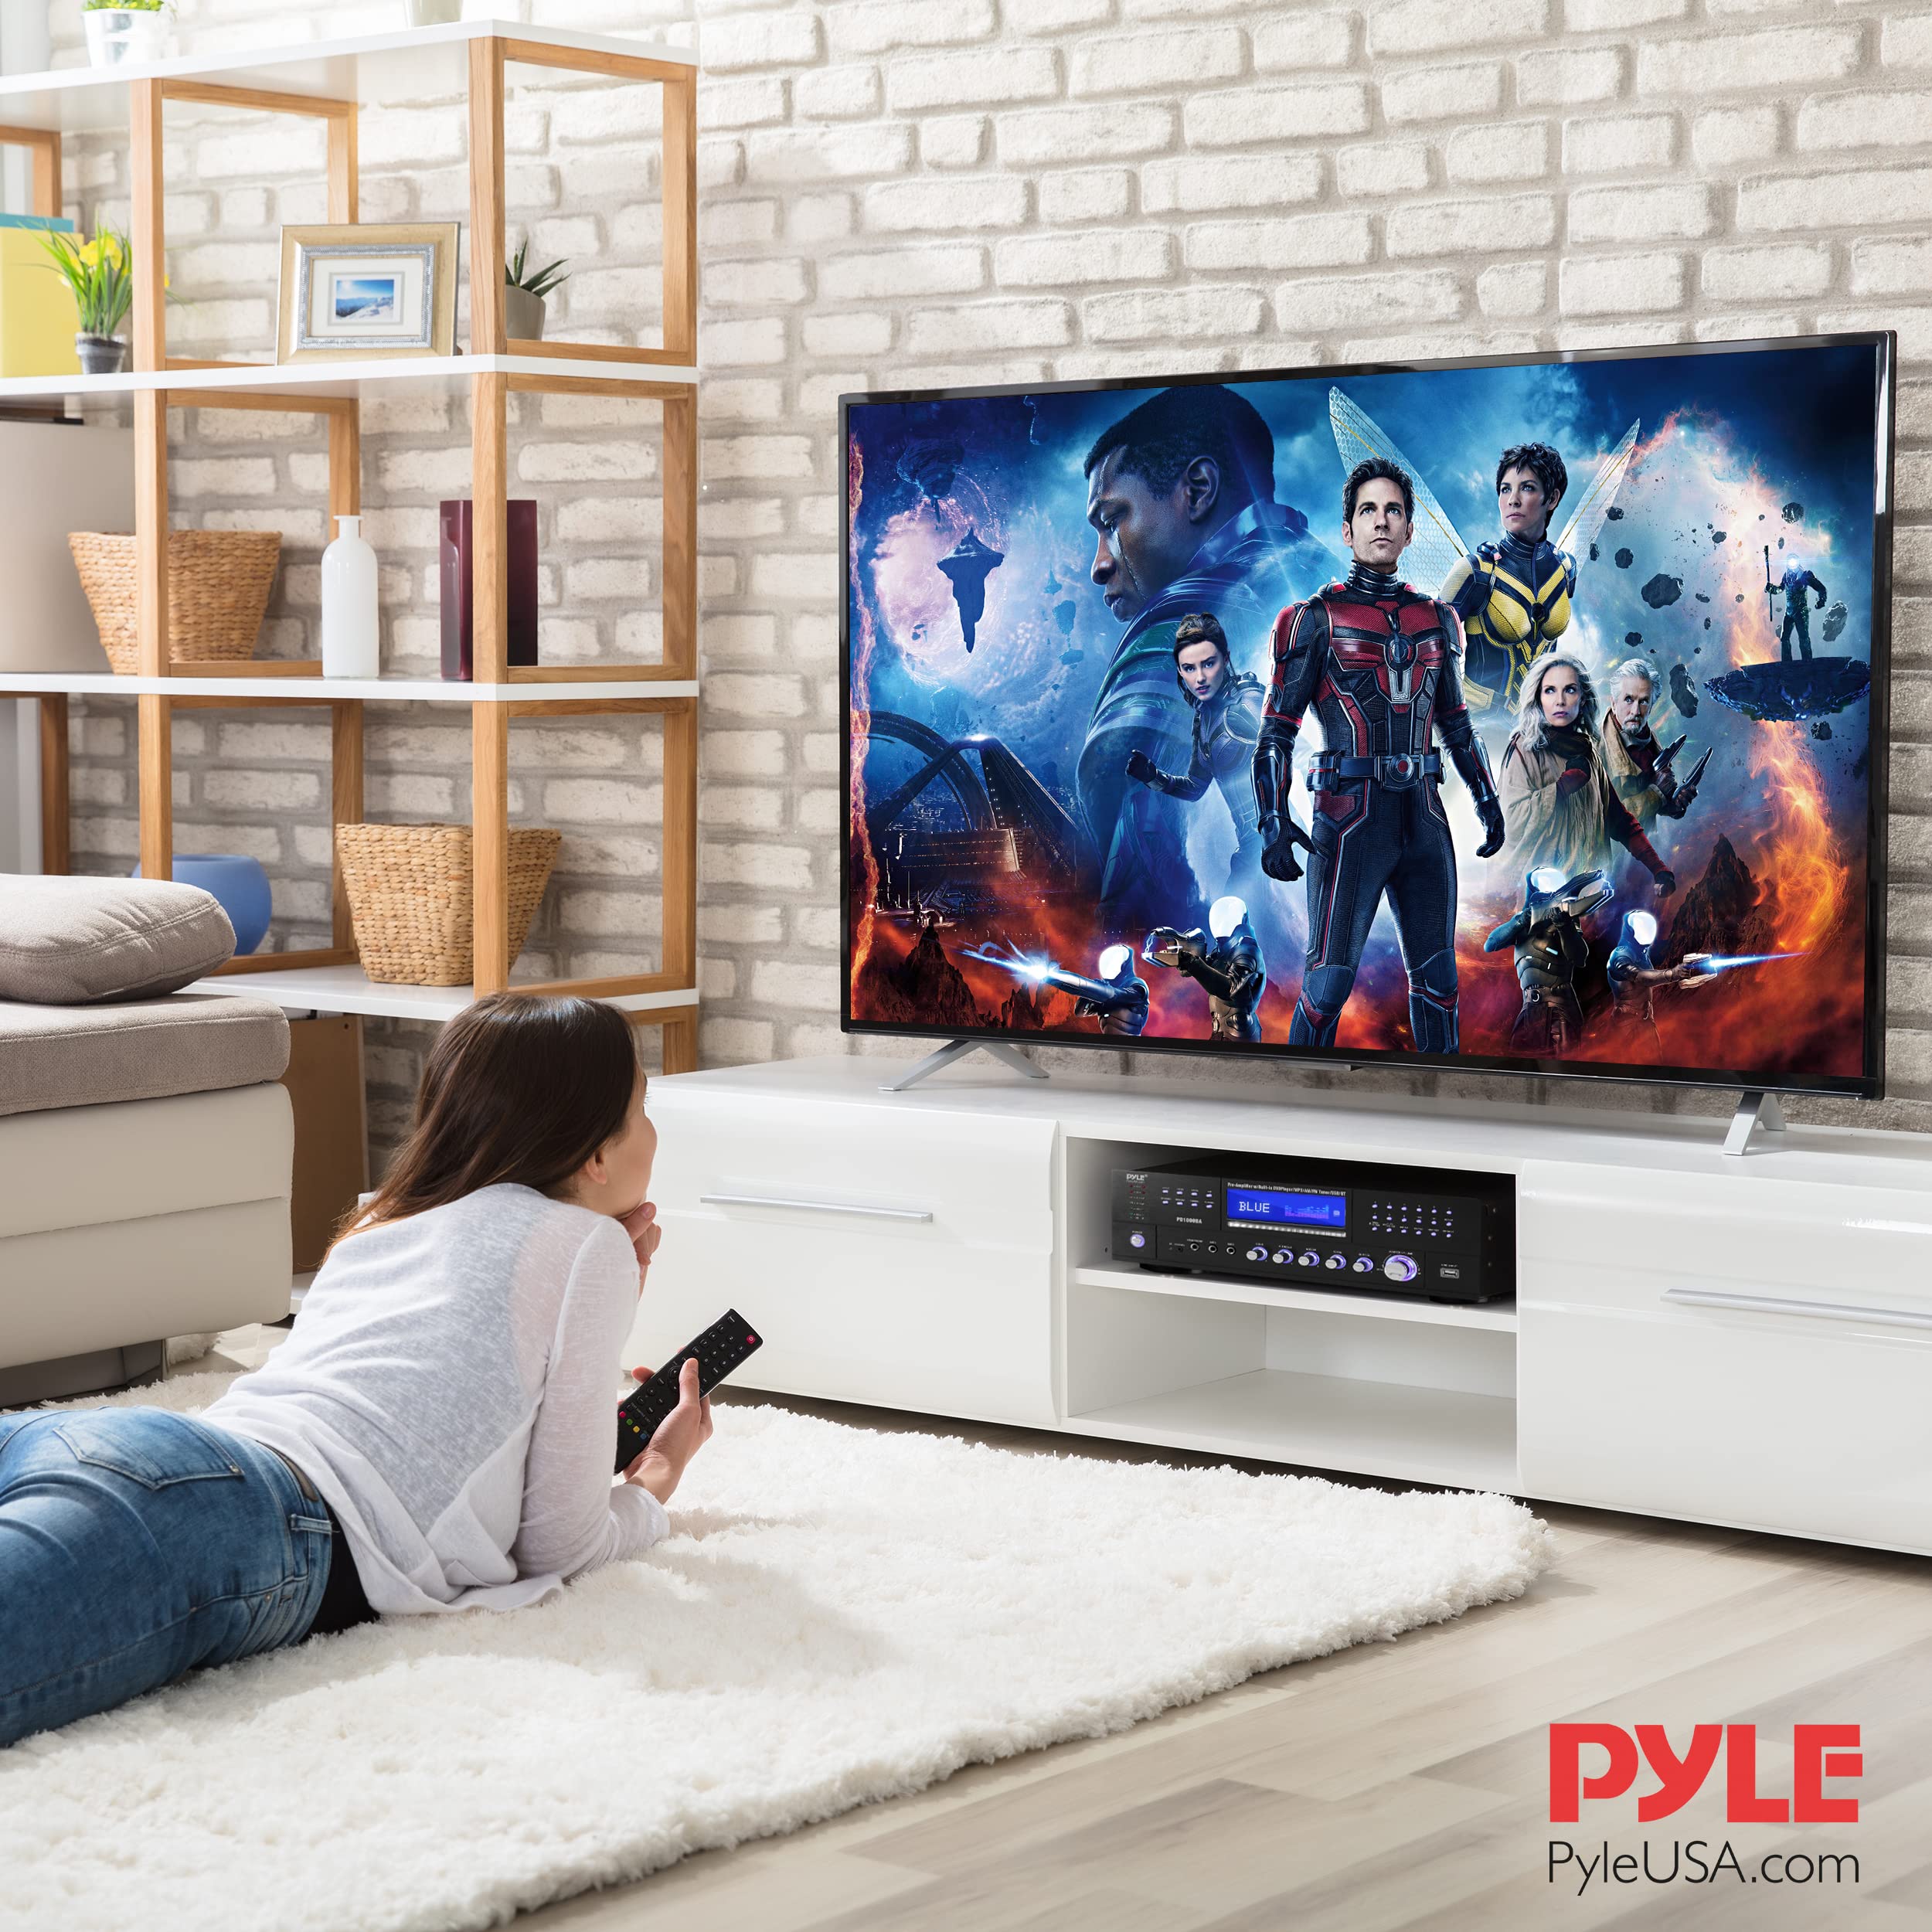 Pyle 4-Channel Audio Receiver Amplifier DVD Player-Bluetooth Compatible, FM Radio, CD, USB, 7 Inputs, Echo for Karaoke, LED Display, Powerful Speaker Amplifier, Remote Control 1000W